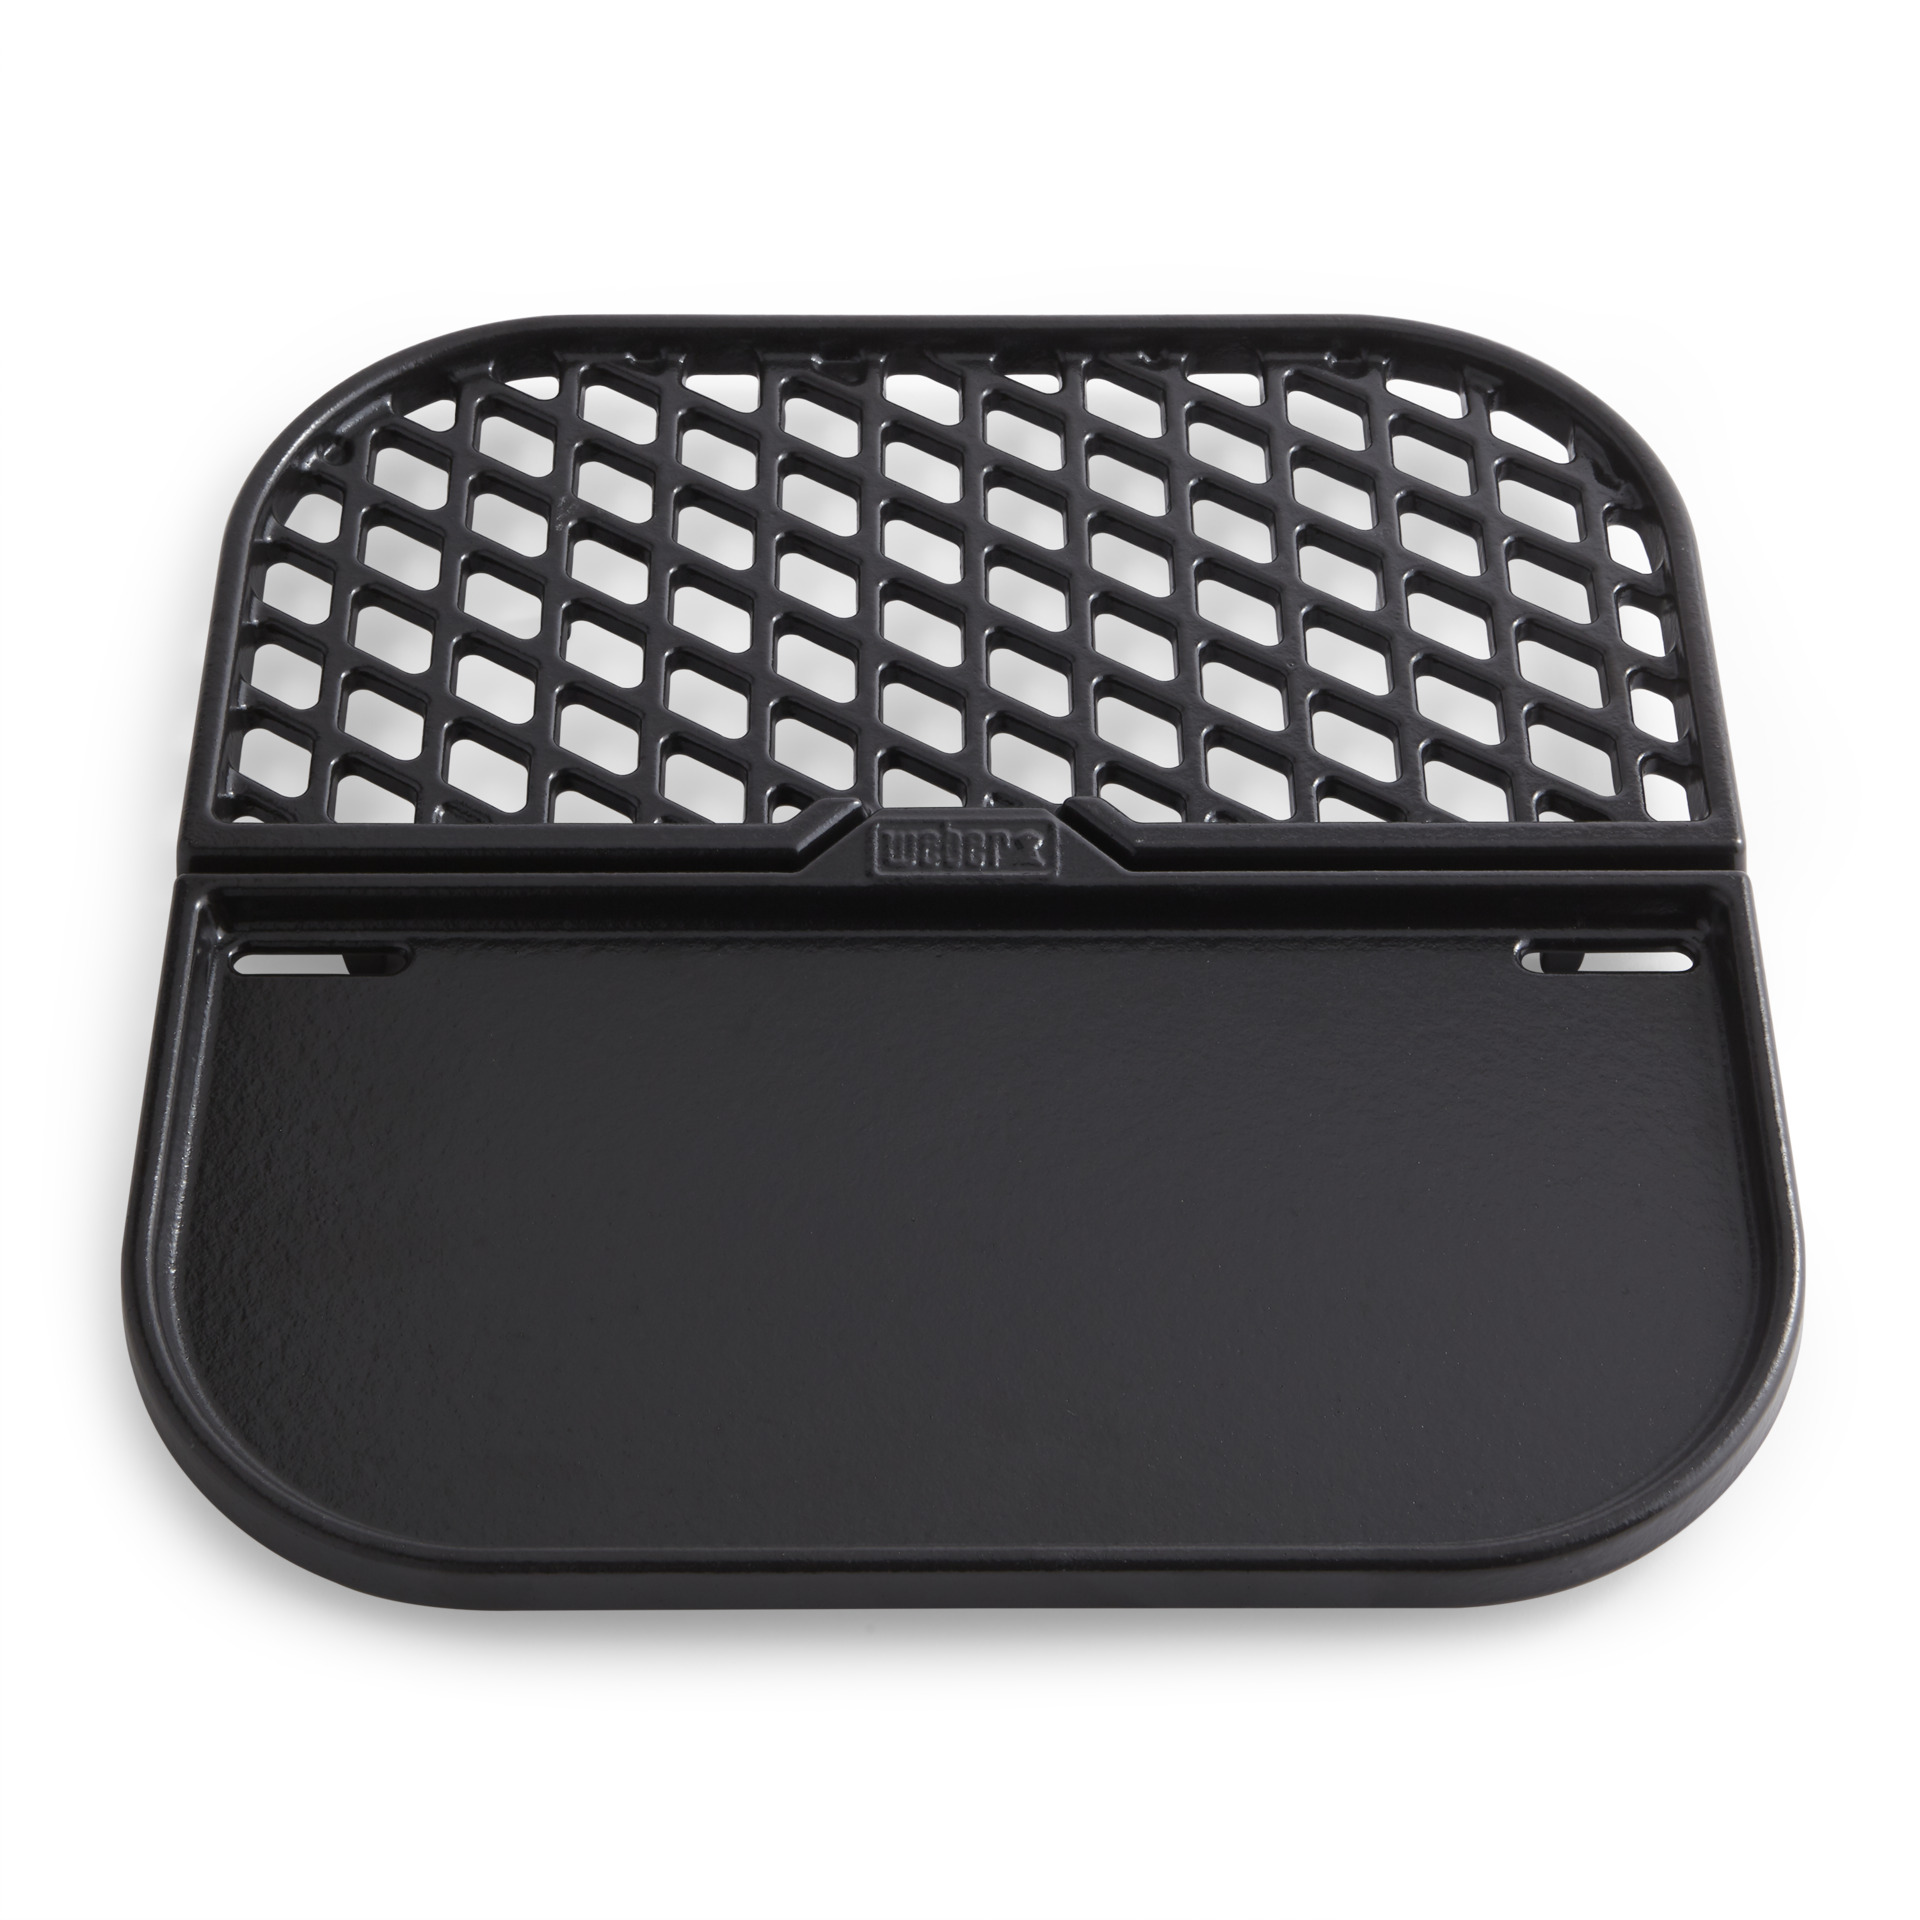 CRAFTED Sear Grate & Grillplatte – Gourmet BBQ System